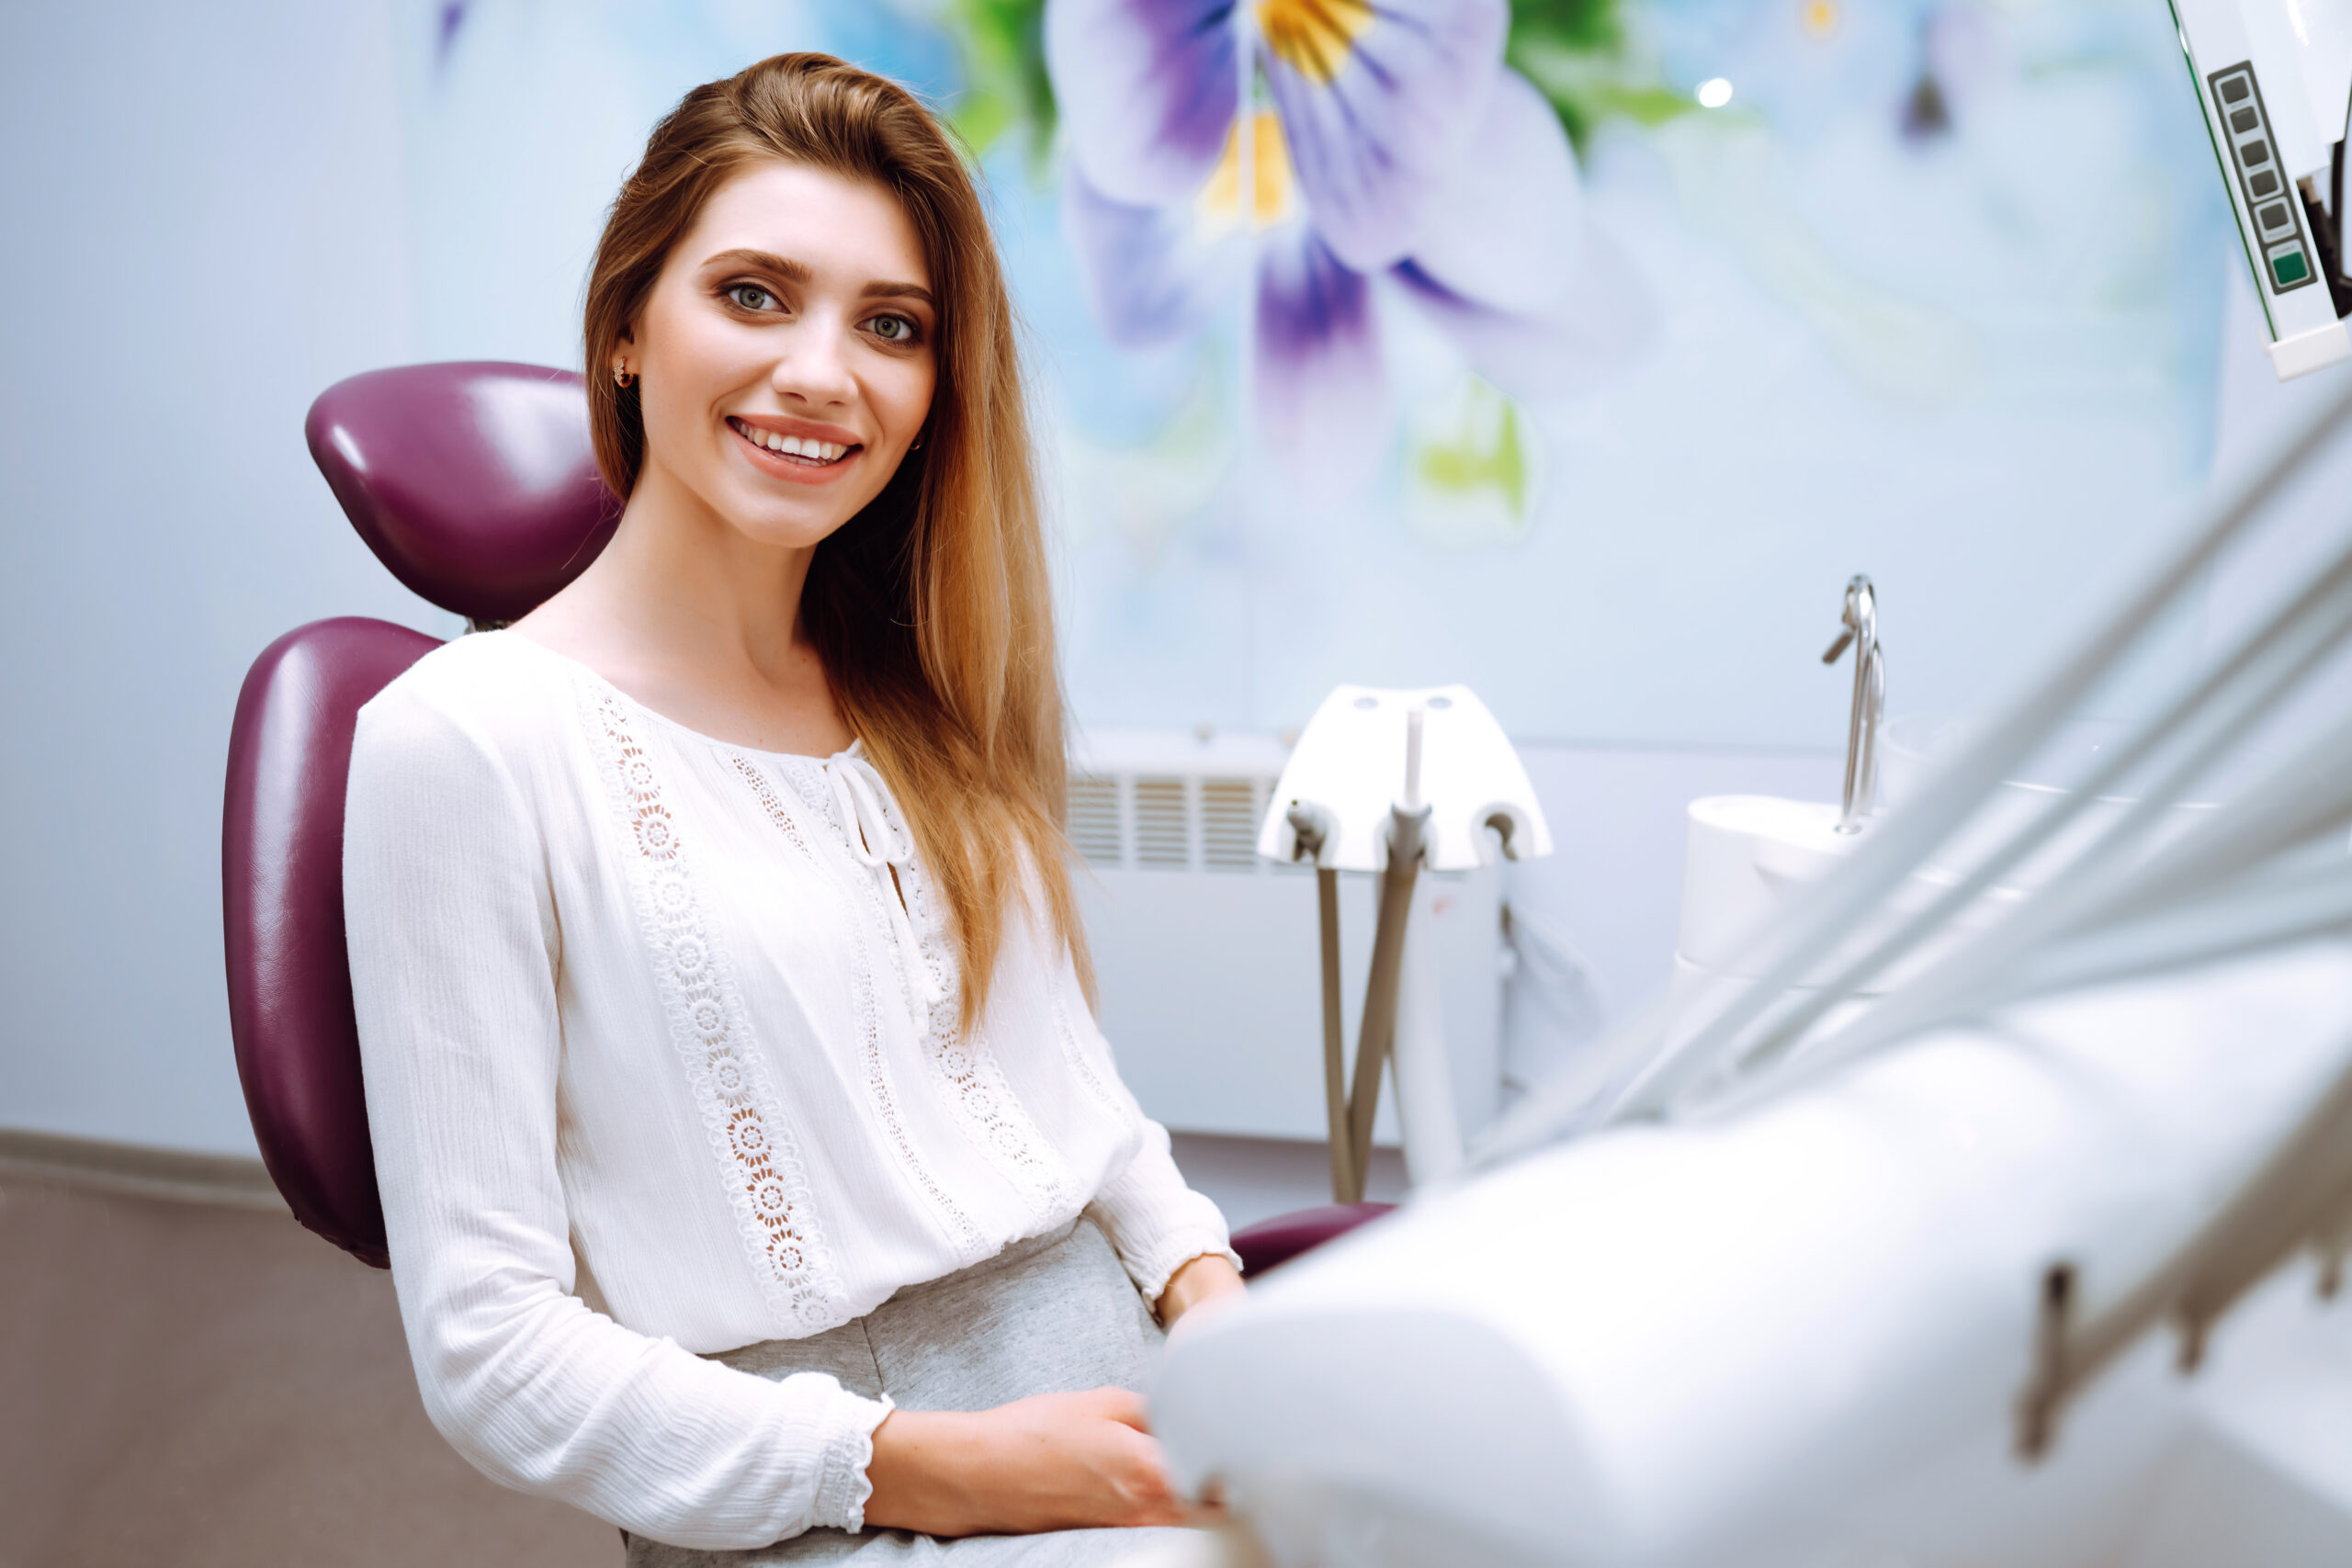 Orthodontics and Overall Health